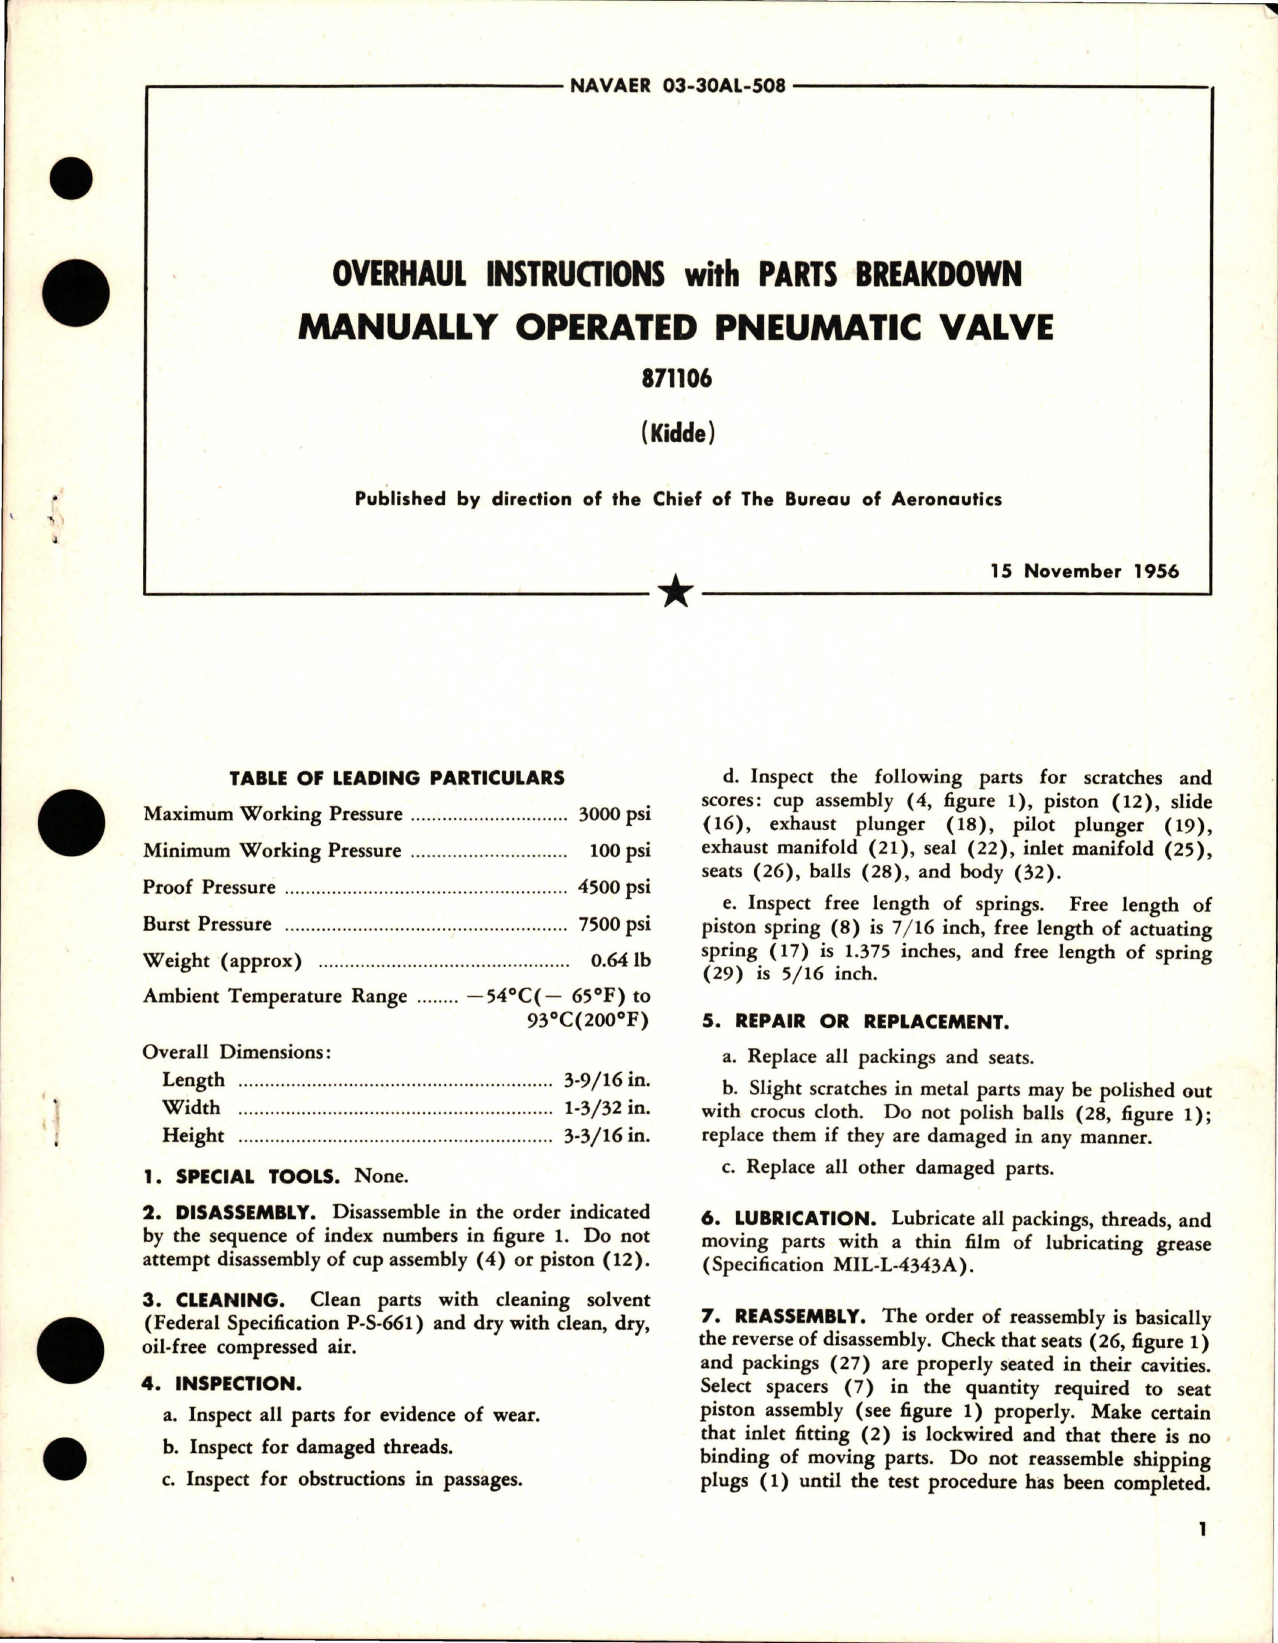 Sample page 1 from AirCorps Library document: Overhaul Instructions with Parts Breakdown for Manually Operated Pneumatic Valve - 871106